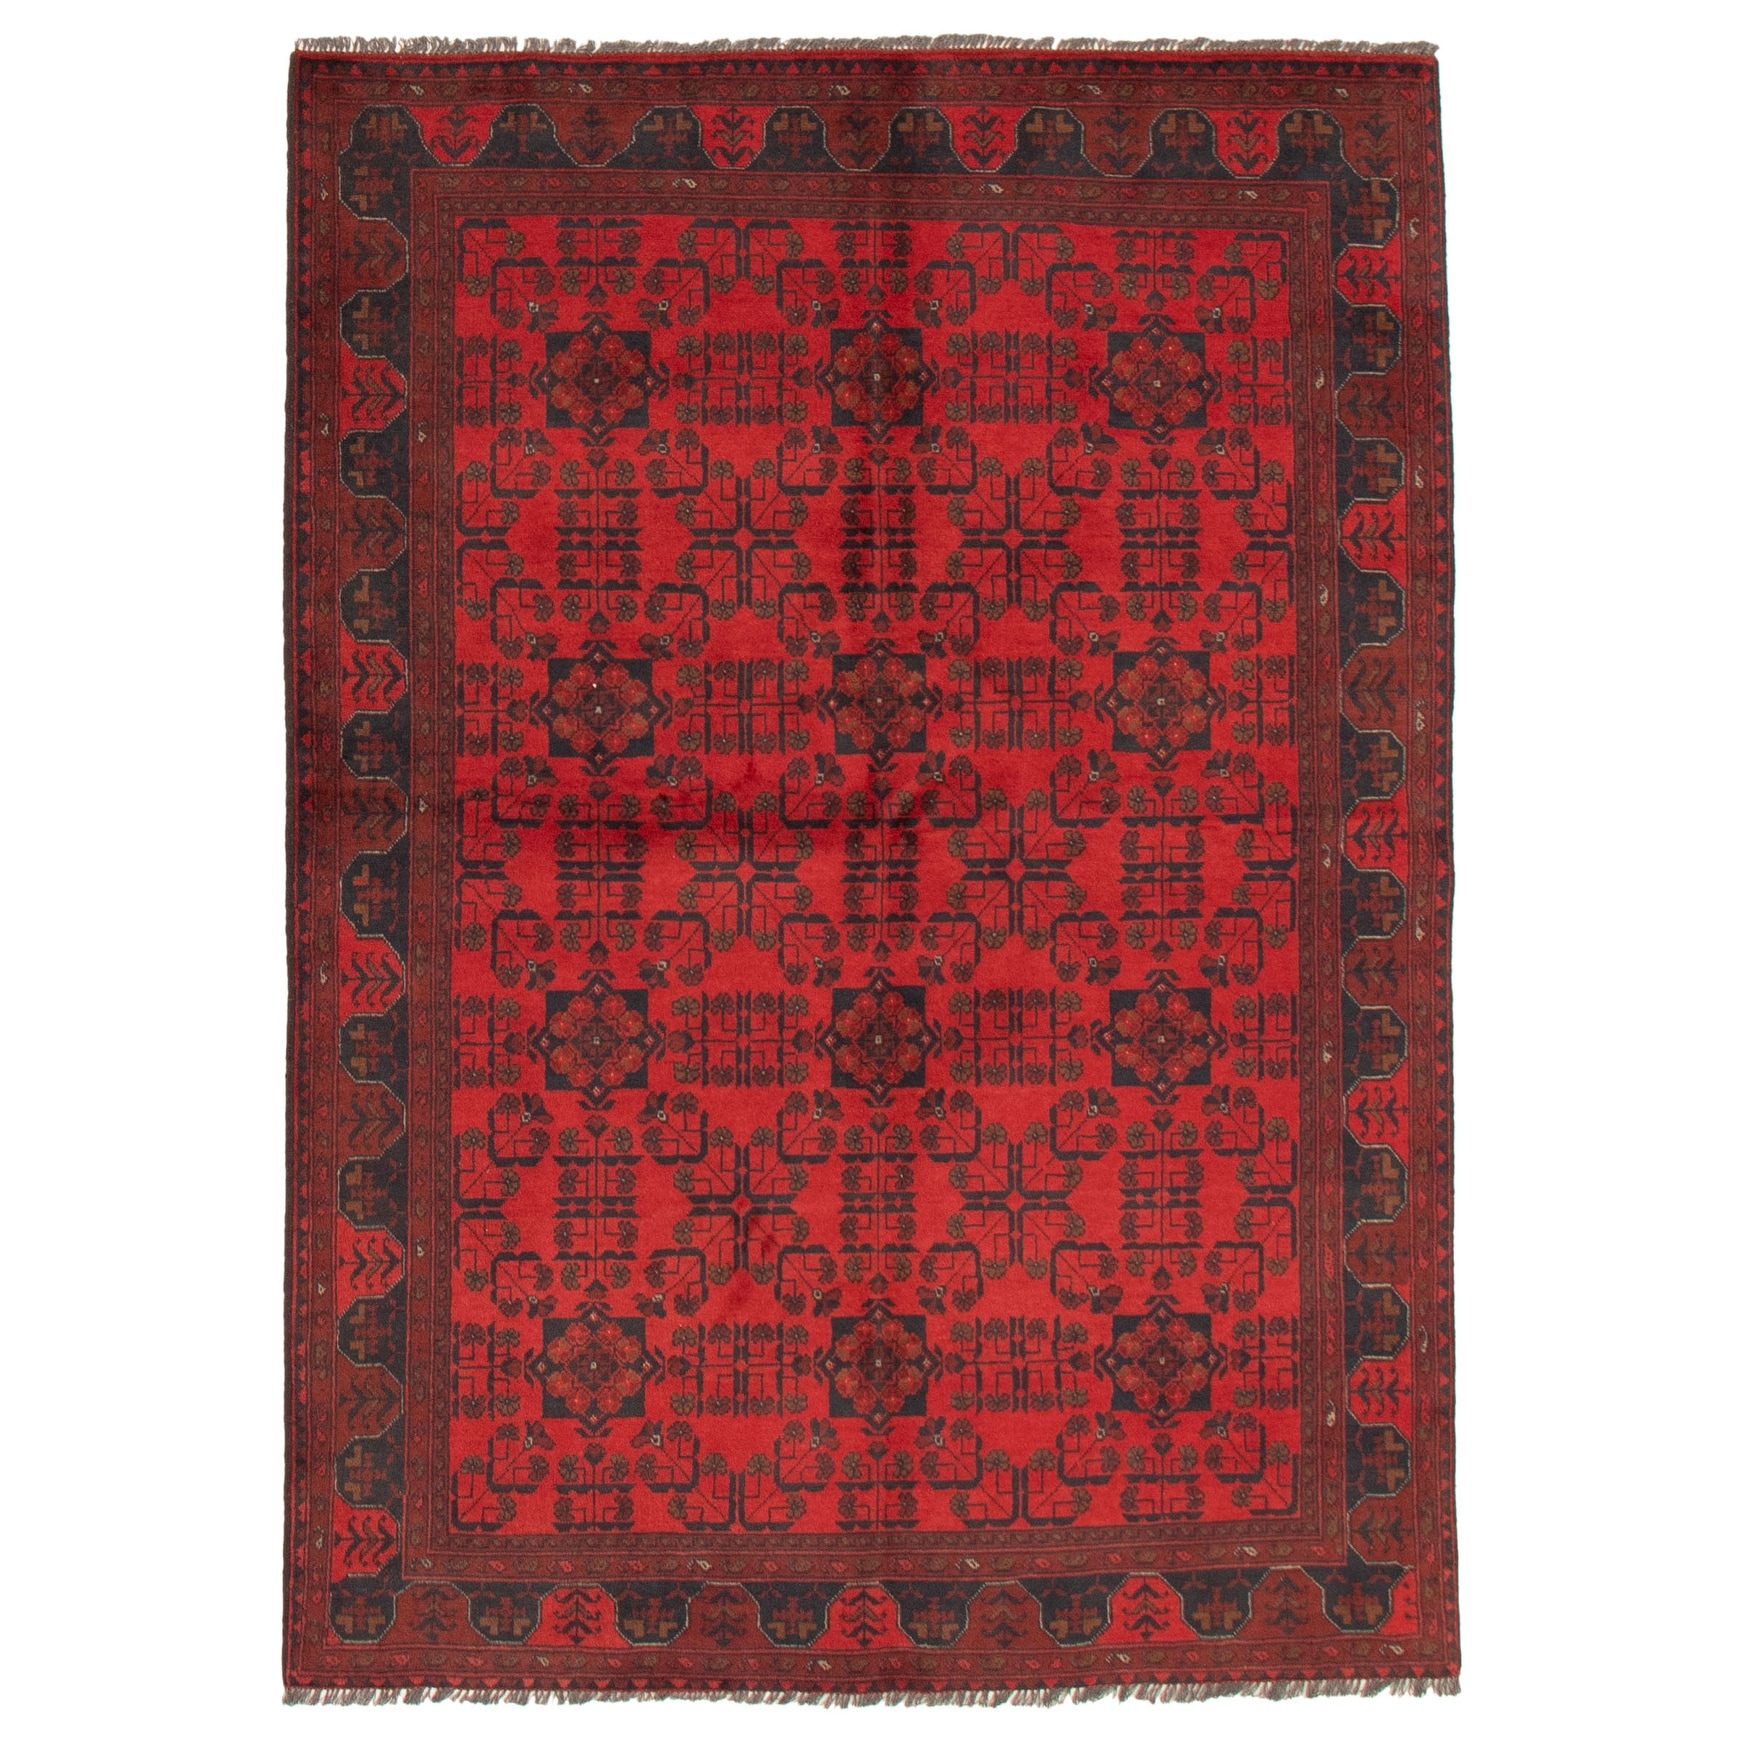 364409 Hand-Knotted Wool Rug eCarpet Gallery Area Rug for Living Room Bedroom Finest Khal Mohammadi Bordered Red Rug 5'10 x 7'10 